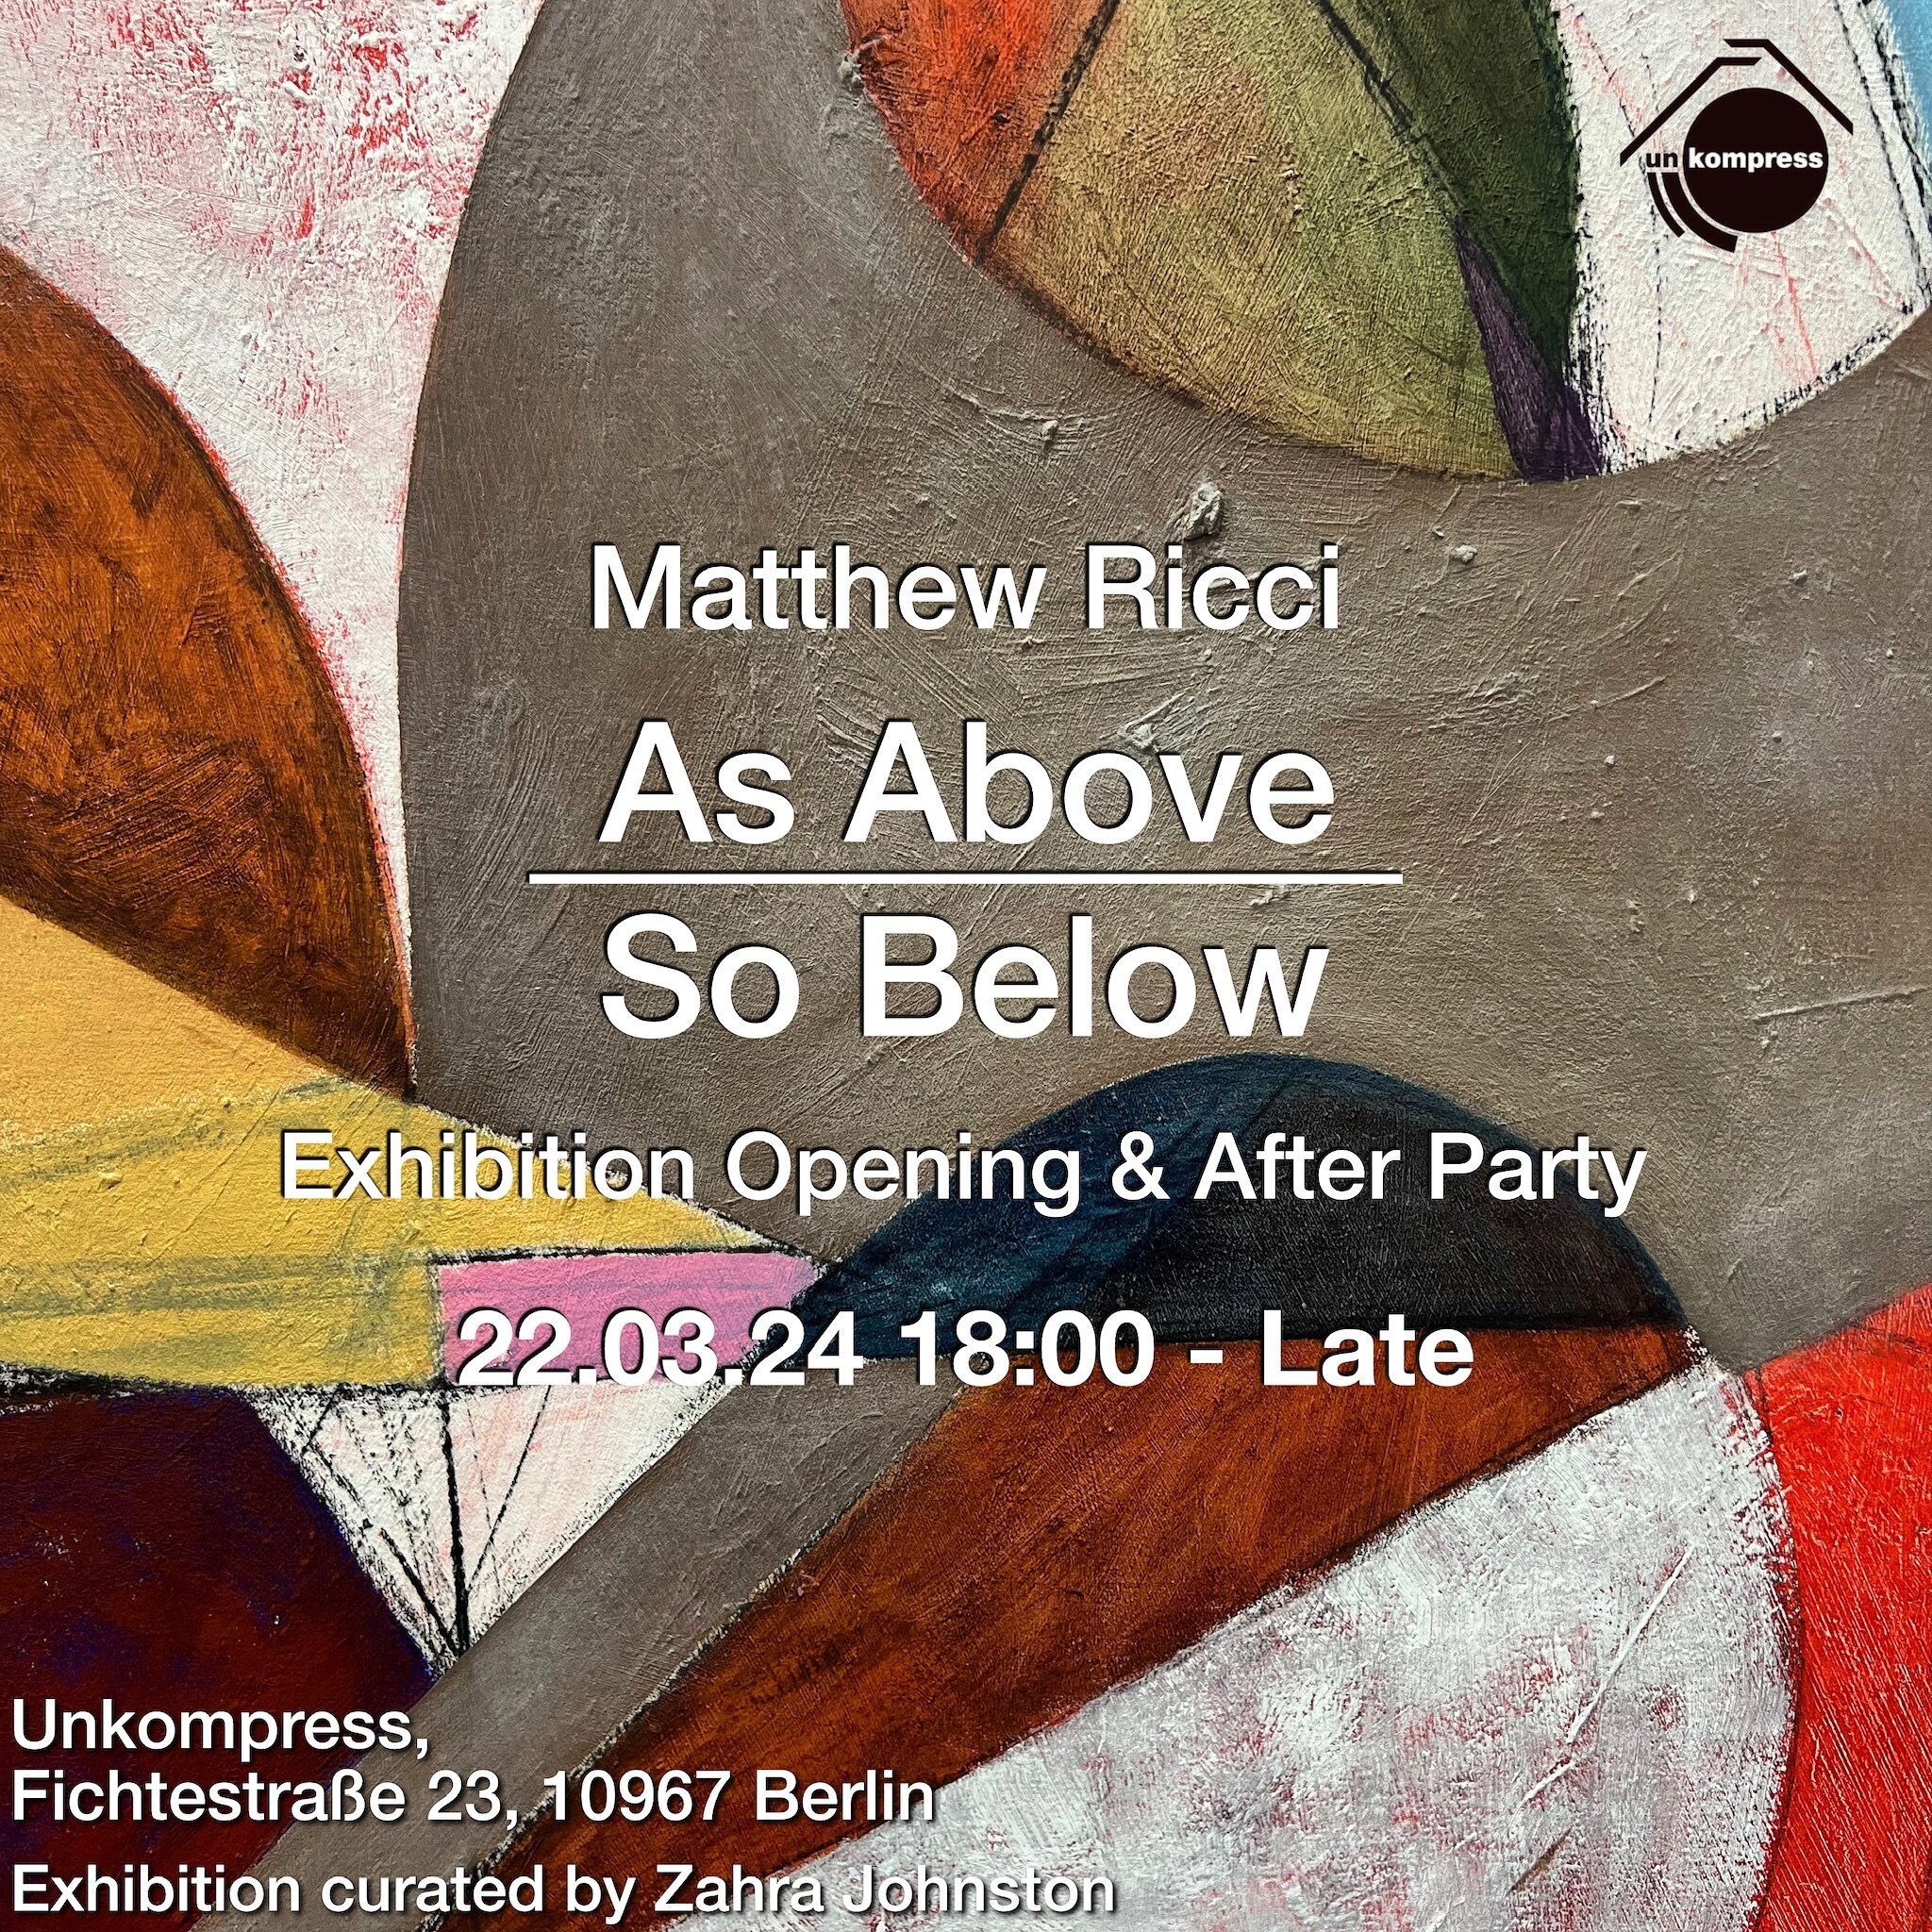 Opening night of the debut exhibition for @matthewricci.artist. As Above So Below turns Unkompress into an art gallery mixing art and music this Friday. We&rsquo;ll be premiering our basement level for a taste of what&rsquo;s to come here at Unkompre